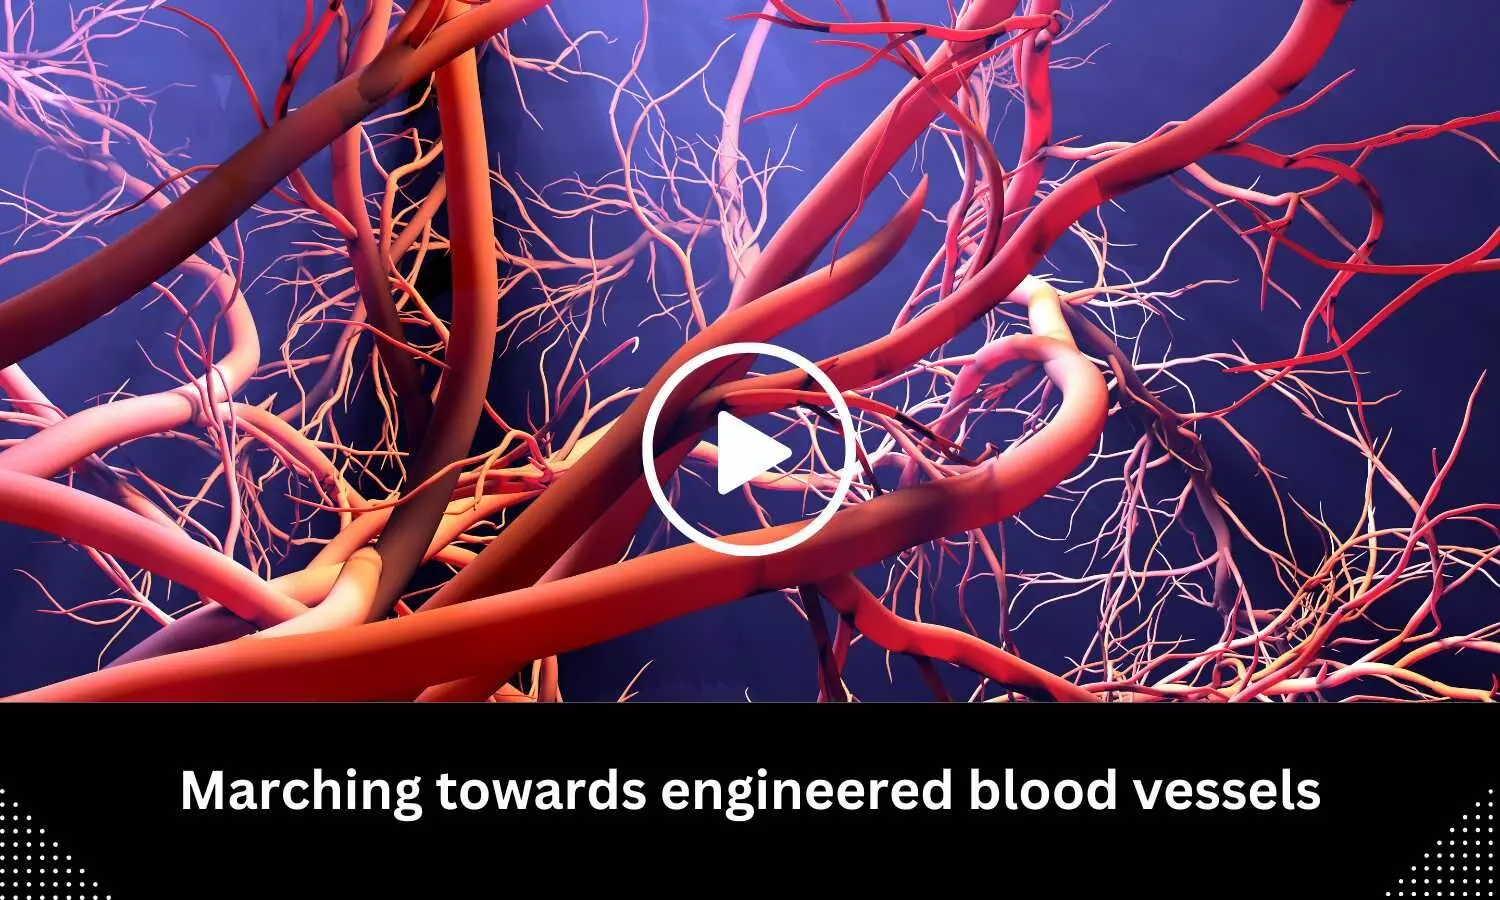 Marching towards engineered blood vessels